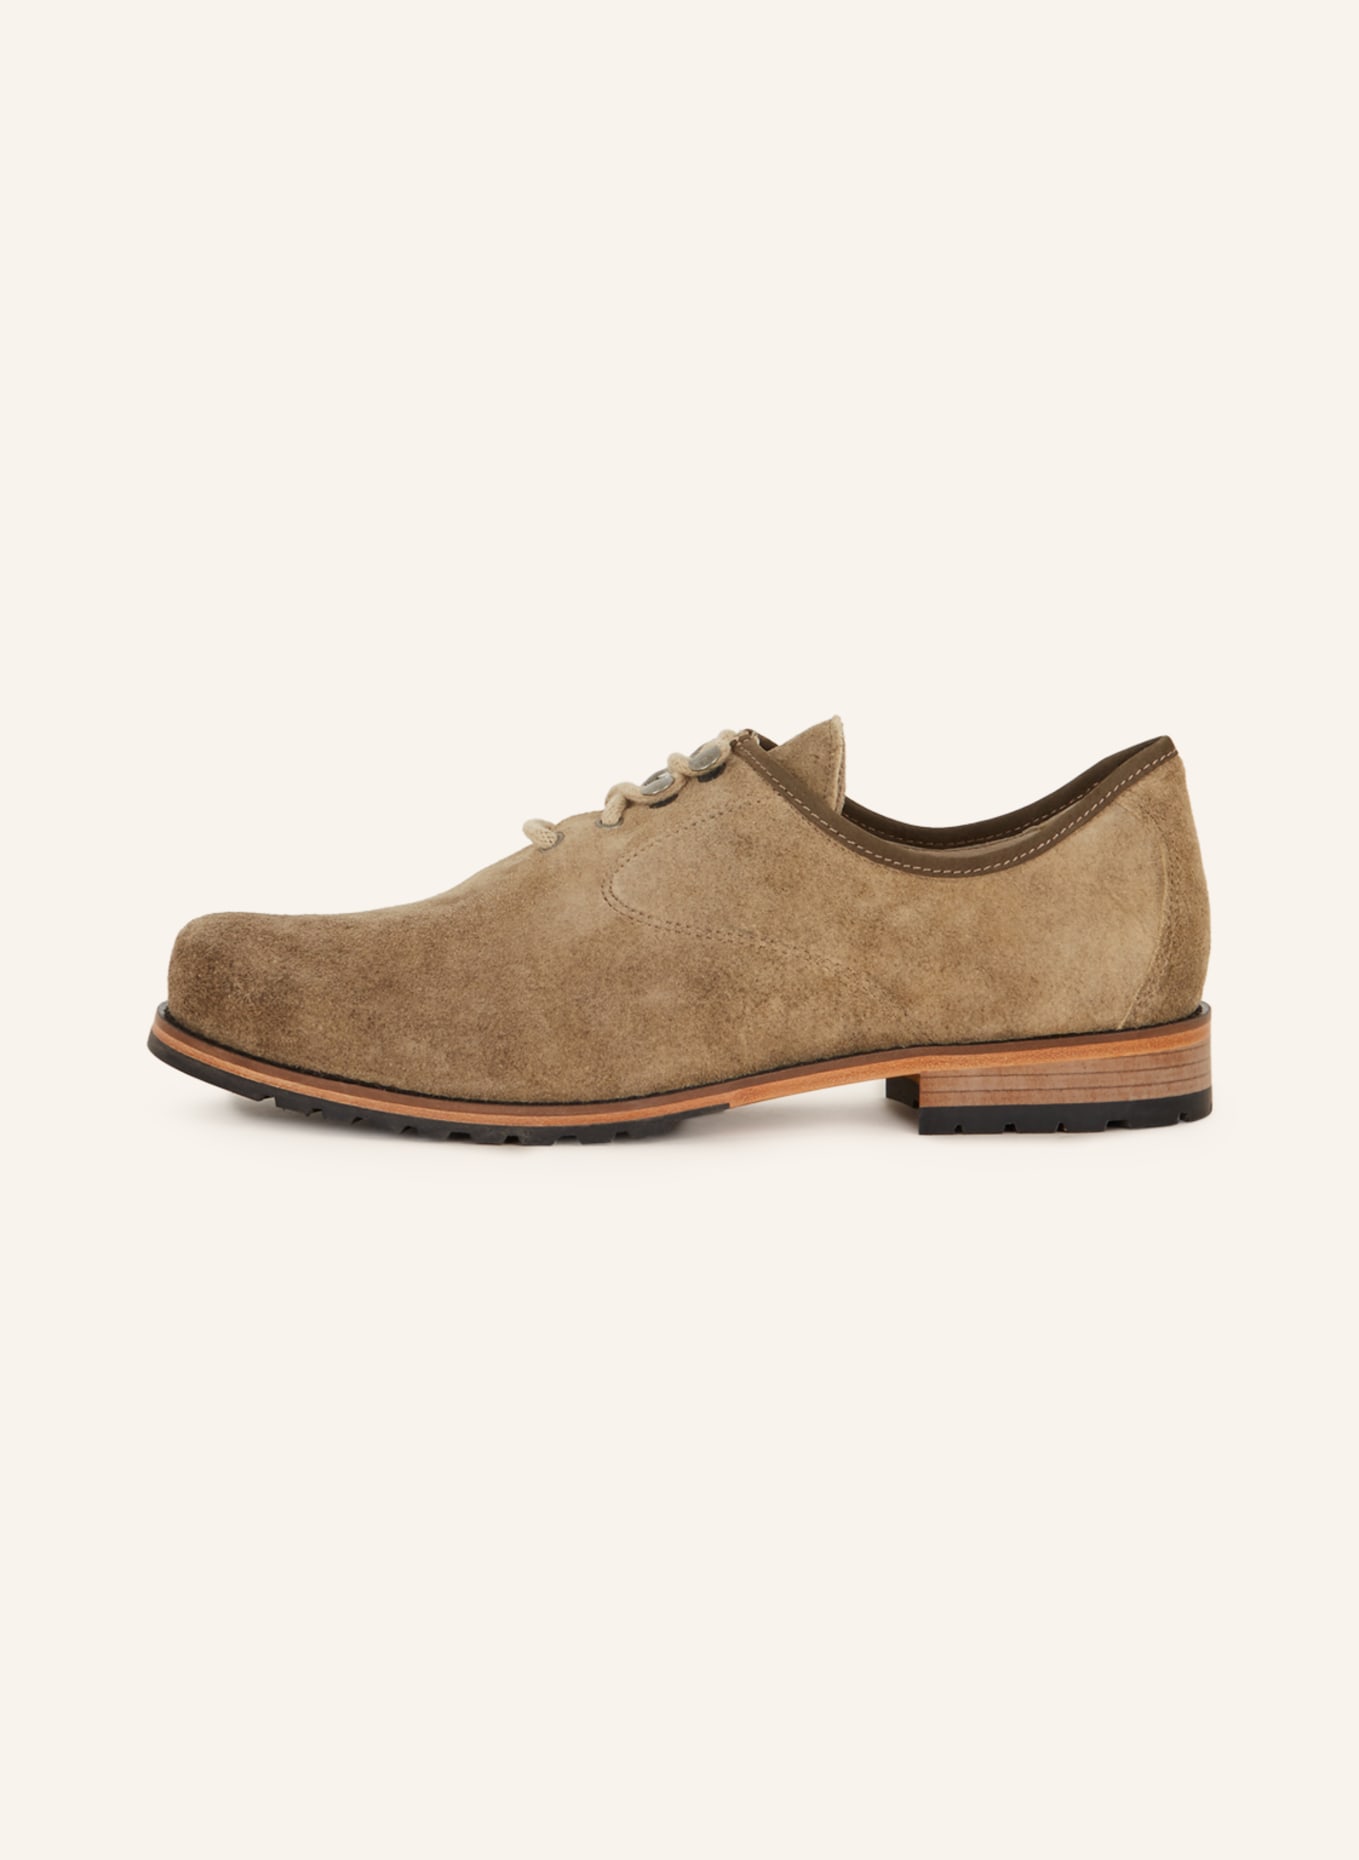 OSTARRICHI Haferl shoes, Color: LIGHT BROWN (Image 4)